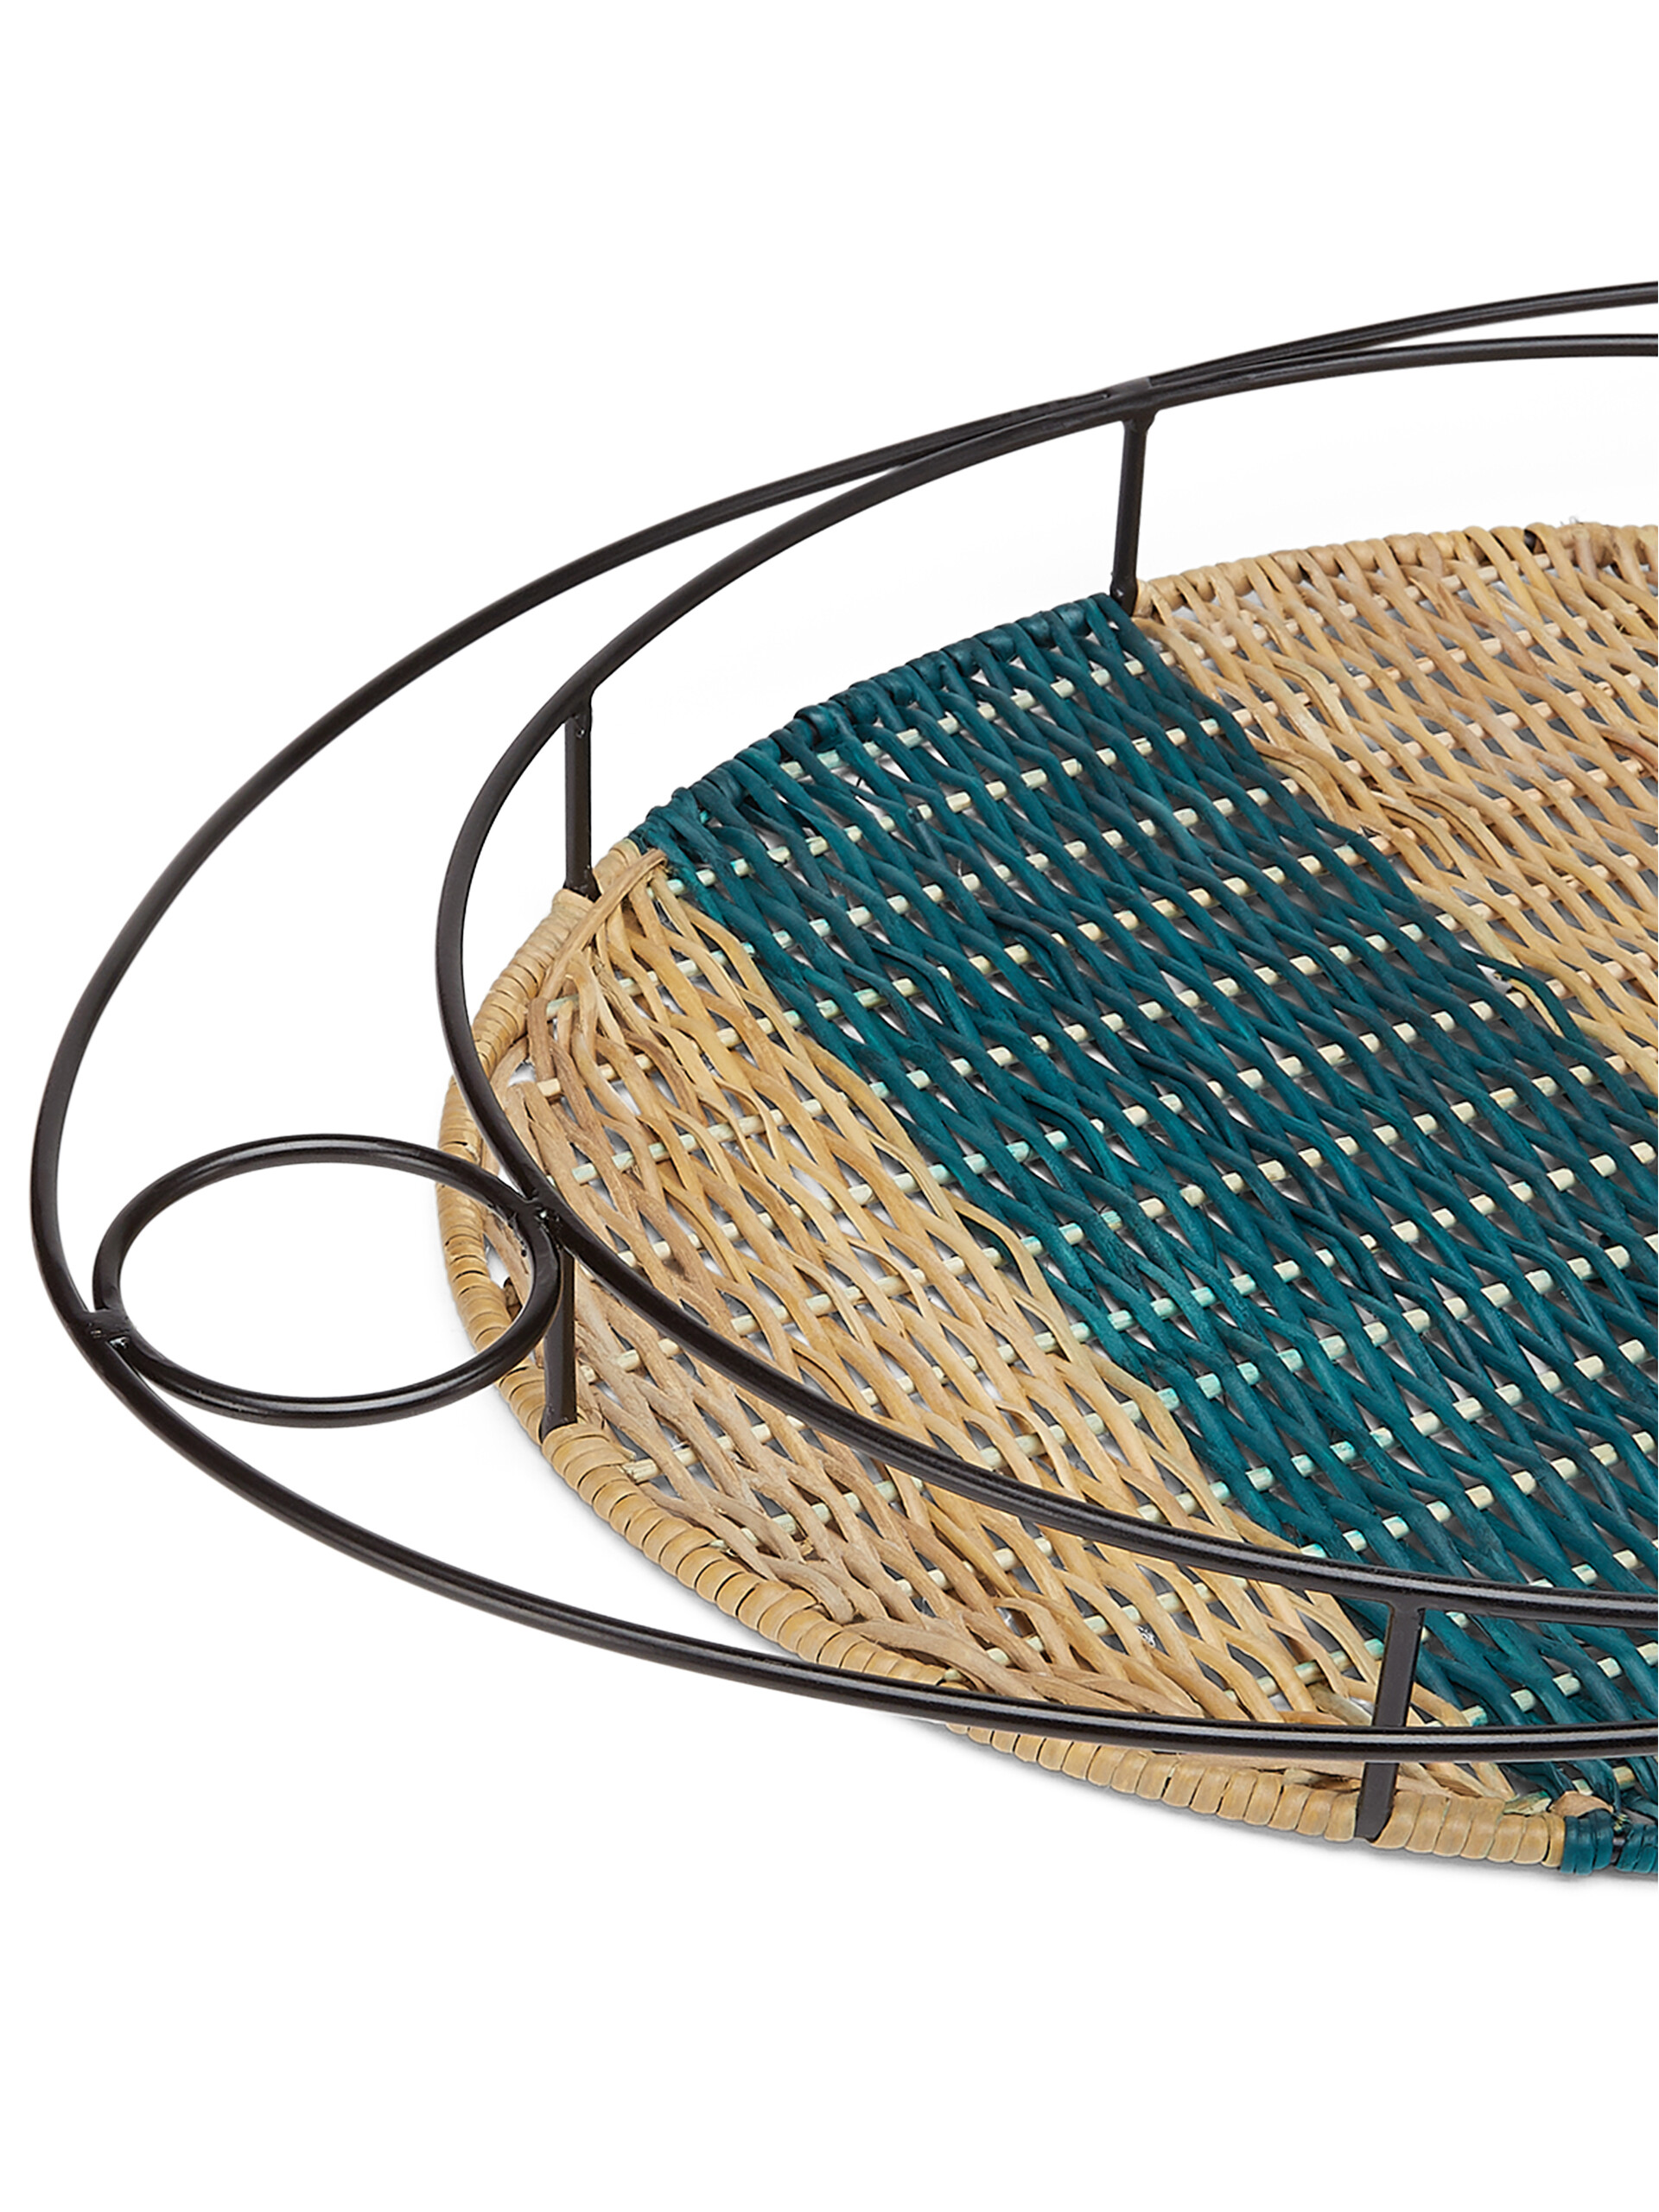 MARNI MARKET oval tray in iron and blue and beige wicker - Accessories - Image 3